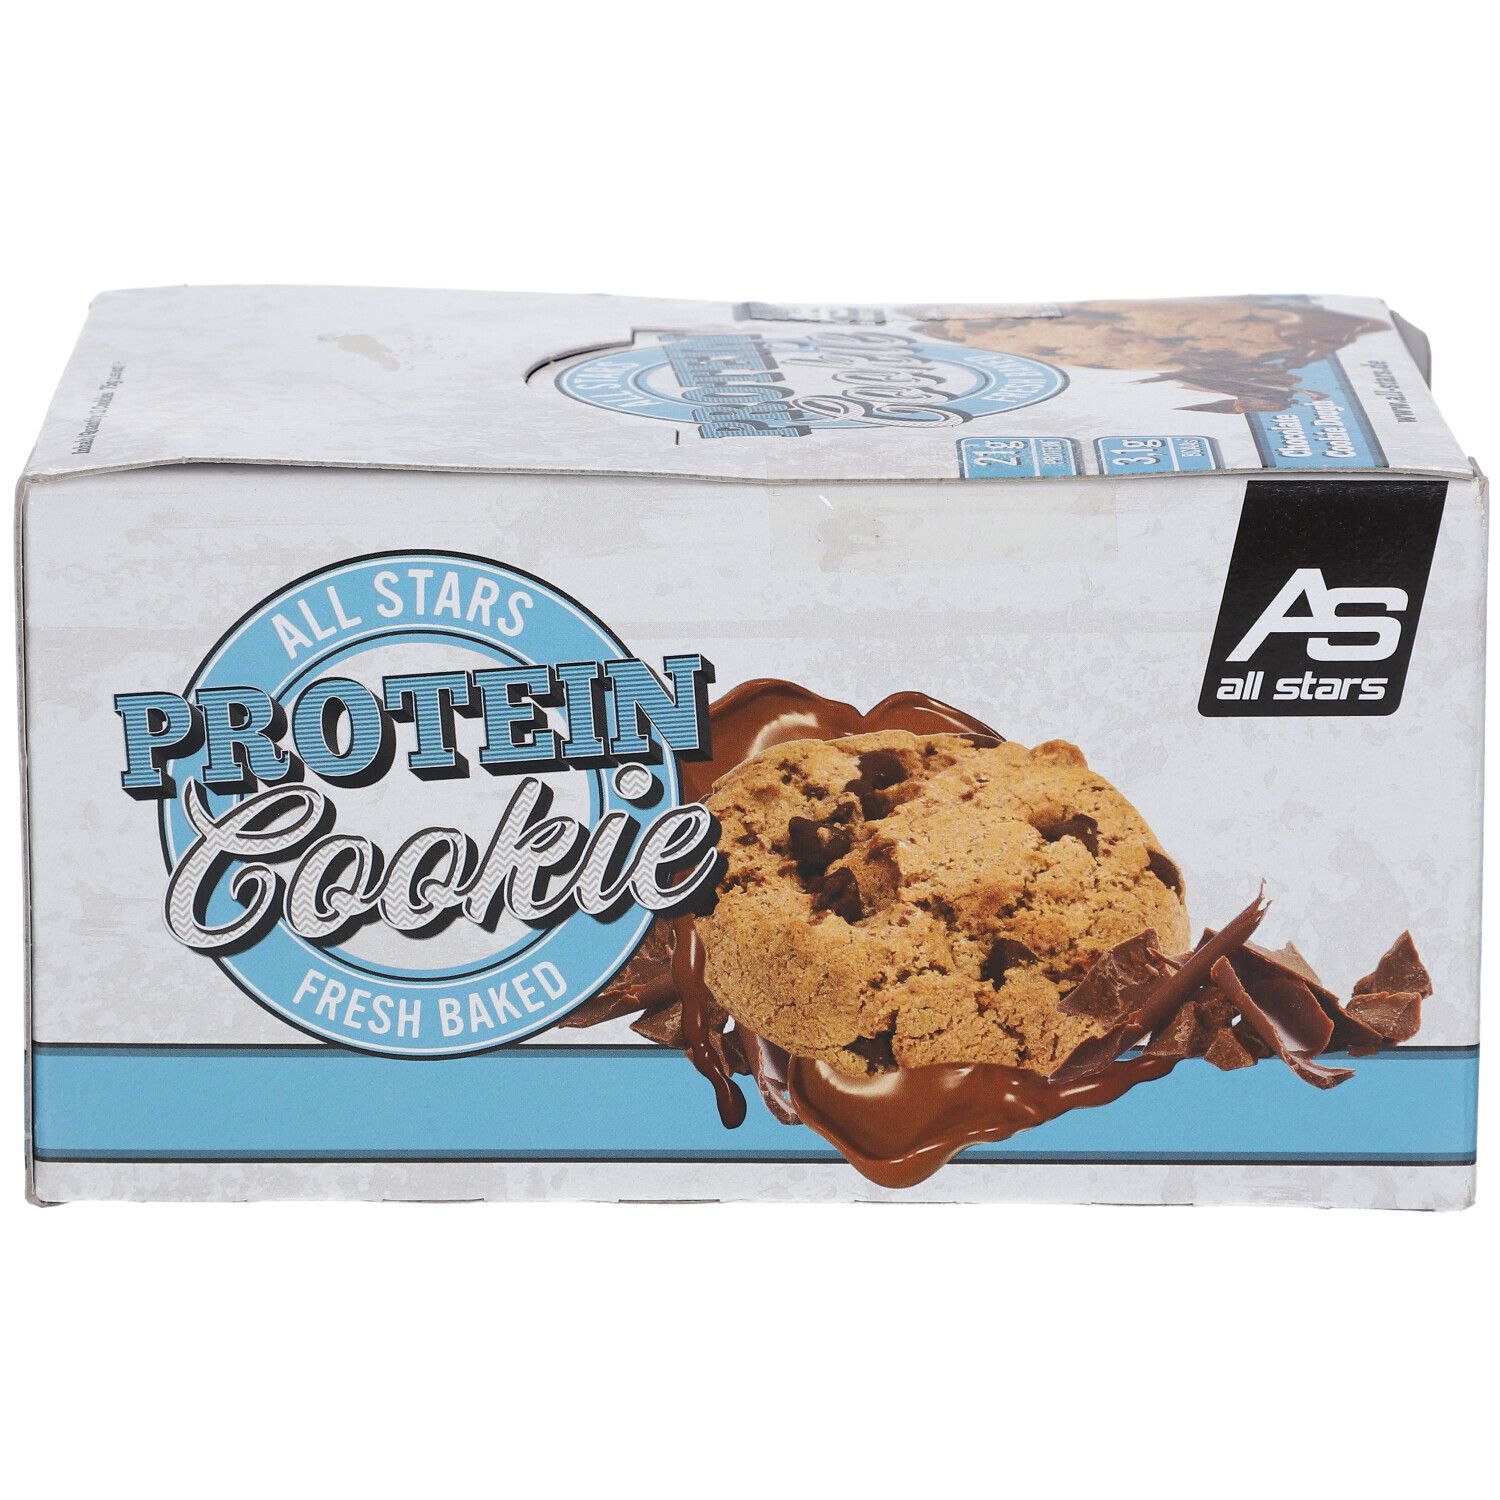 All Stars® Protein Cookie Chocolate Cookie Dough